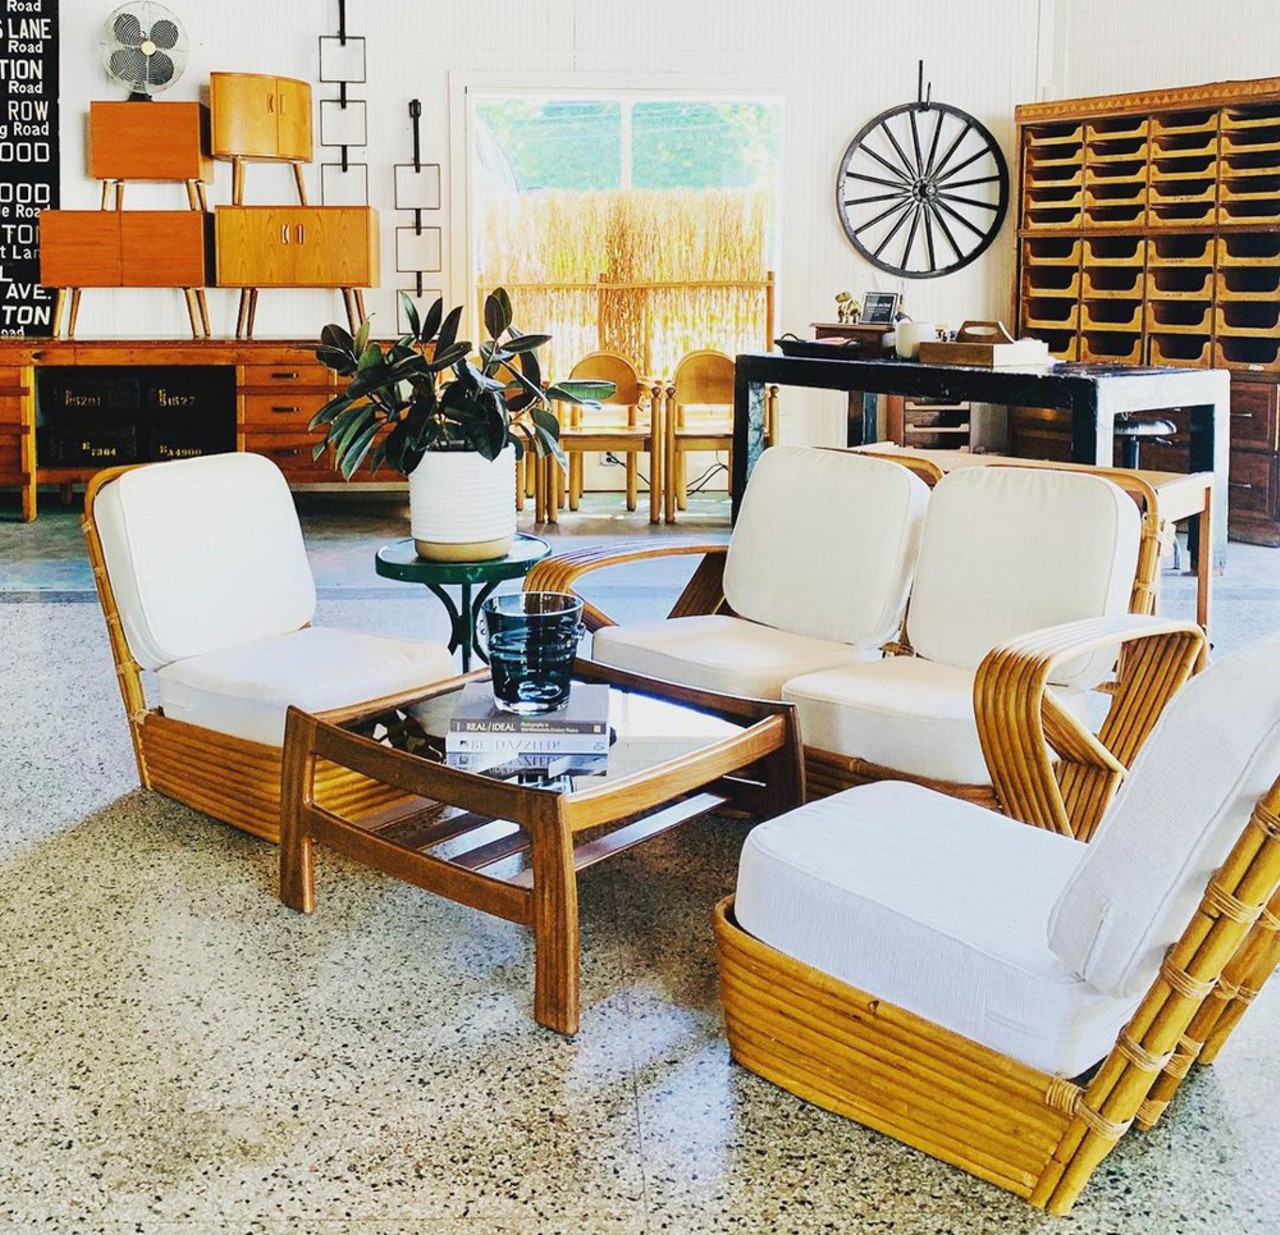  no direction home 
2509 Grinstead Drive
This bright, chic shop specializes in mid-century and international furniture.
Photo via nodirectionhomeky/Instagram